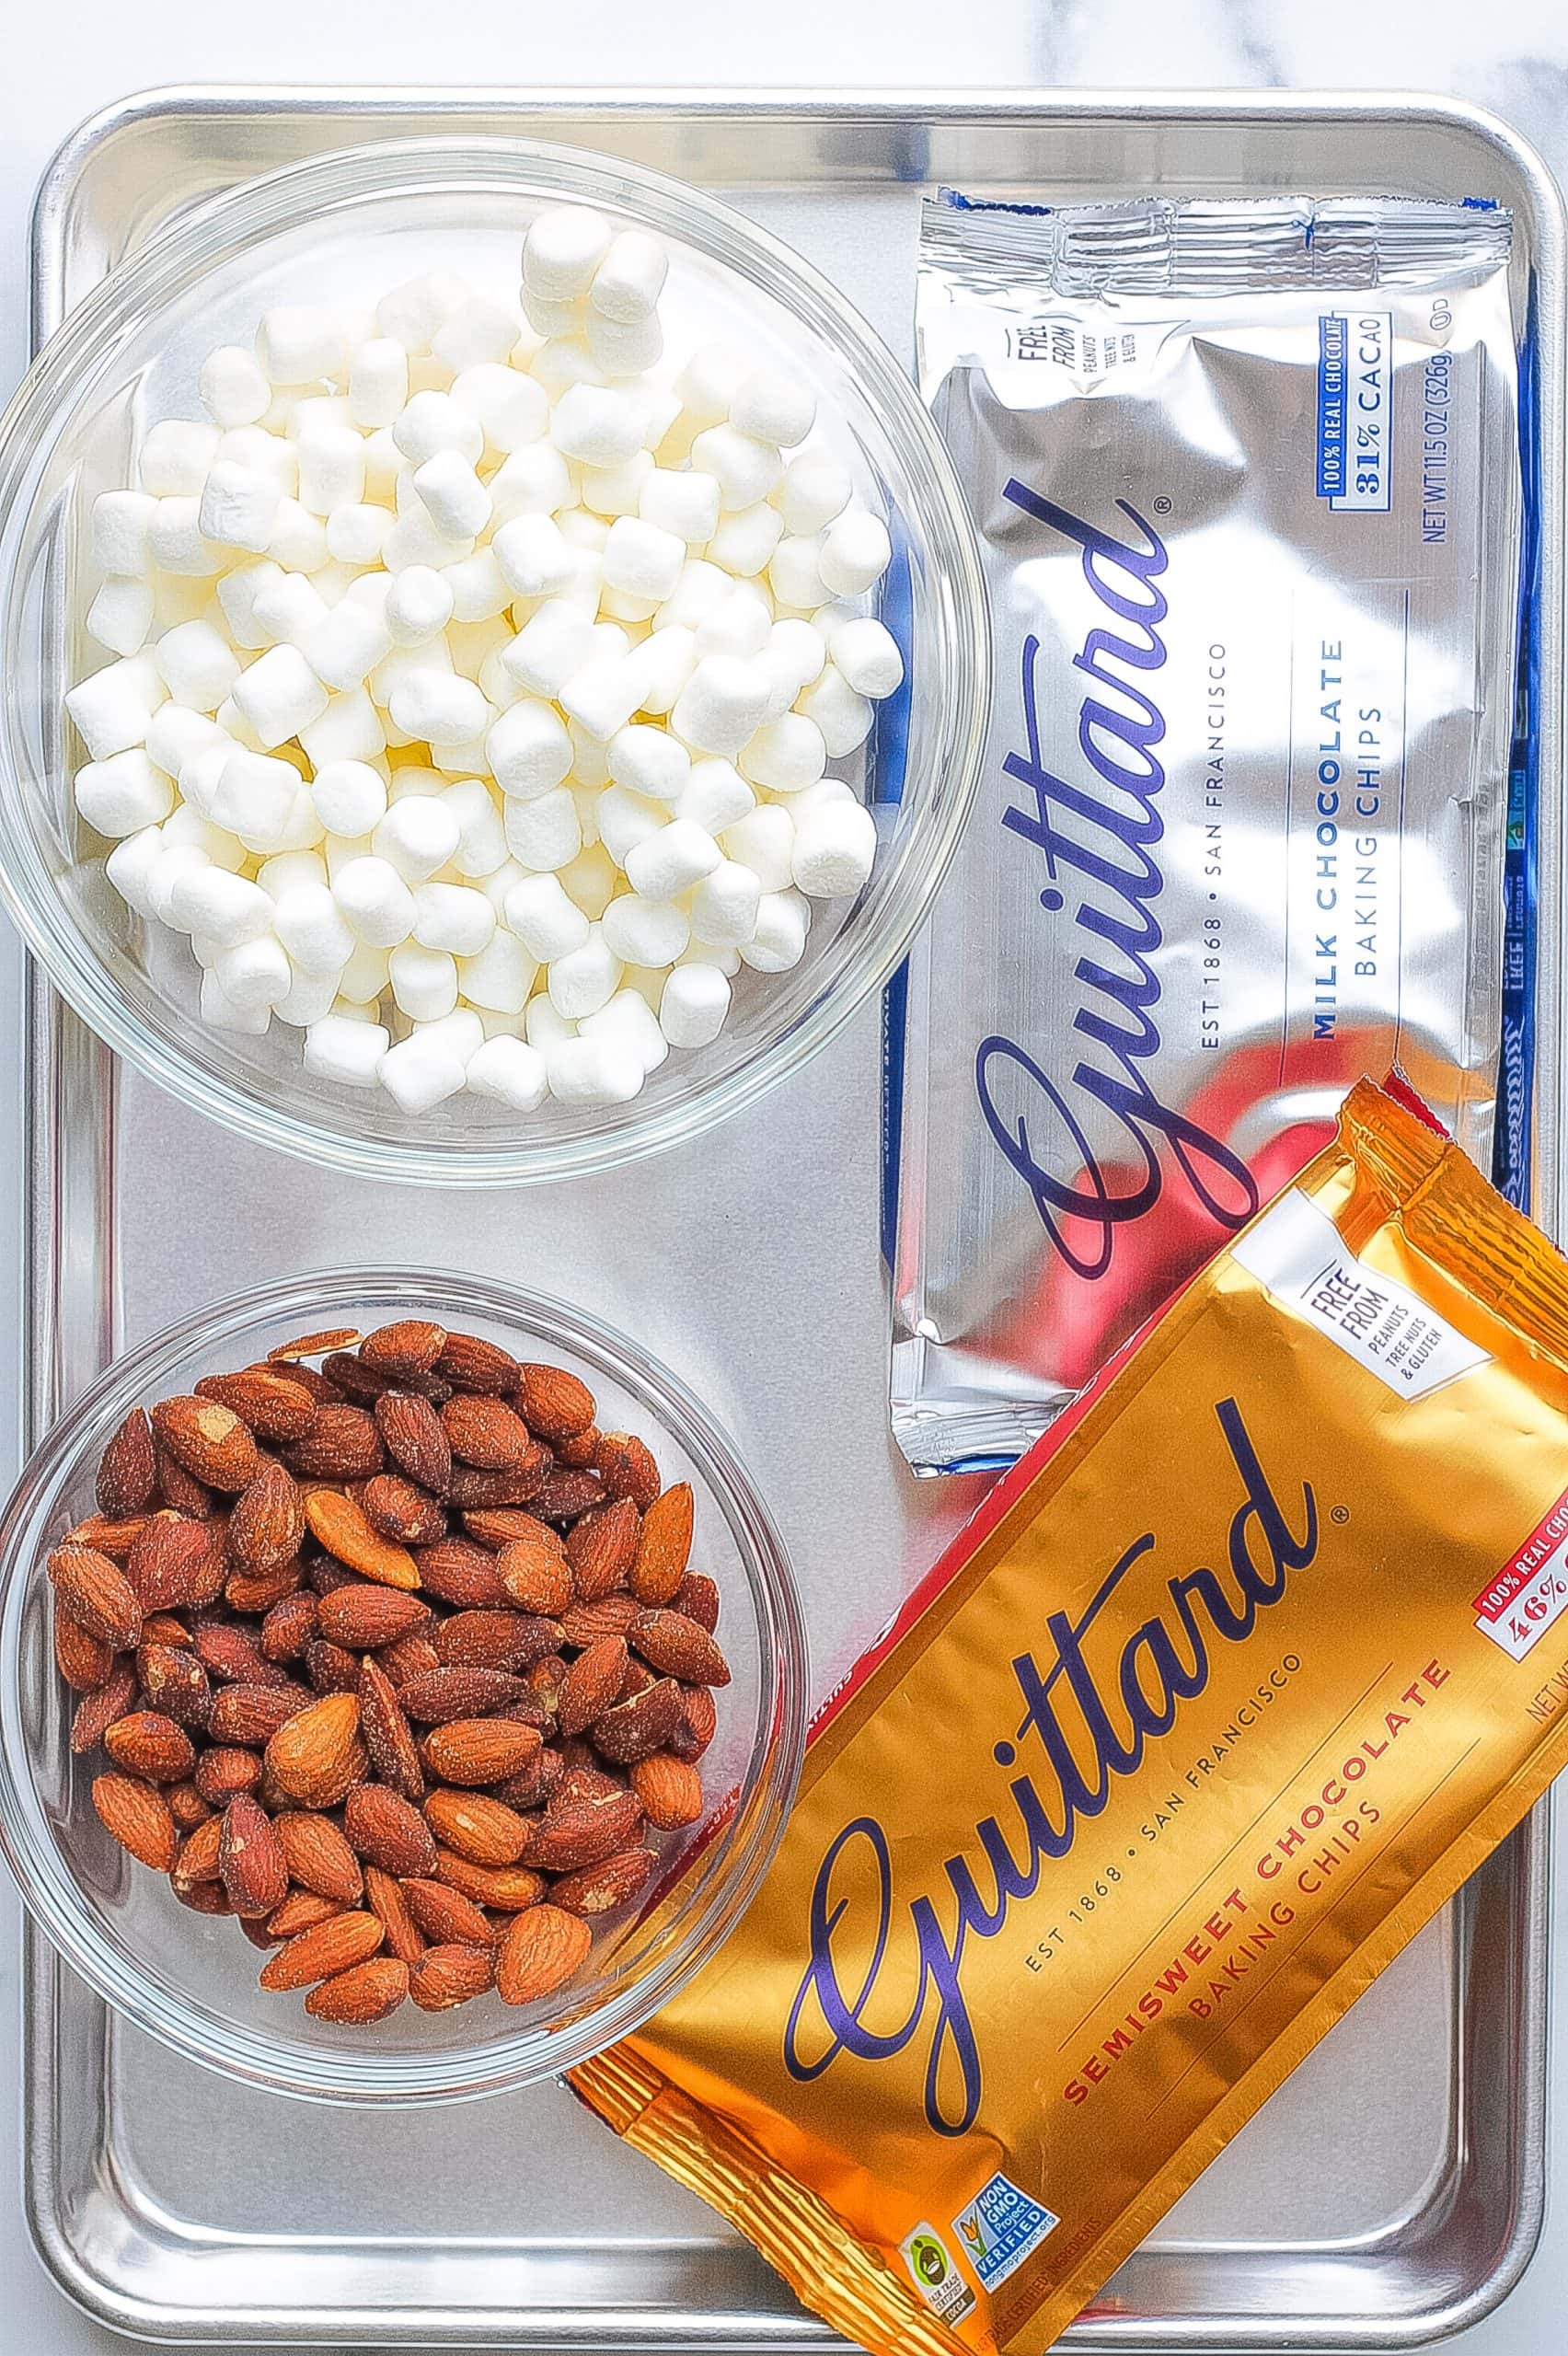 marshmallows, almonds, and chocolate chips on metal tray